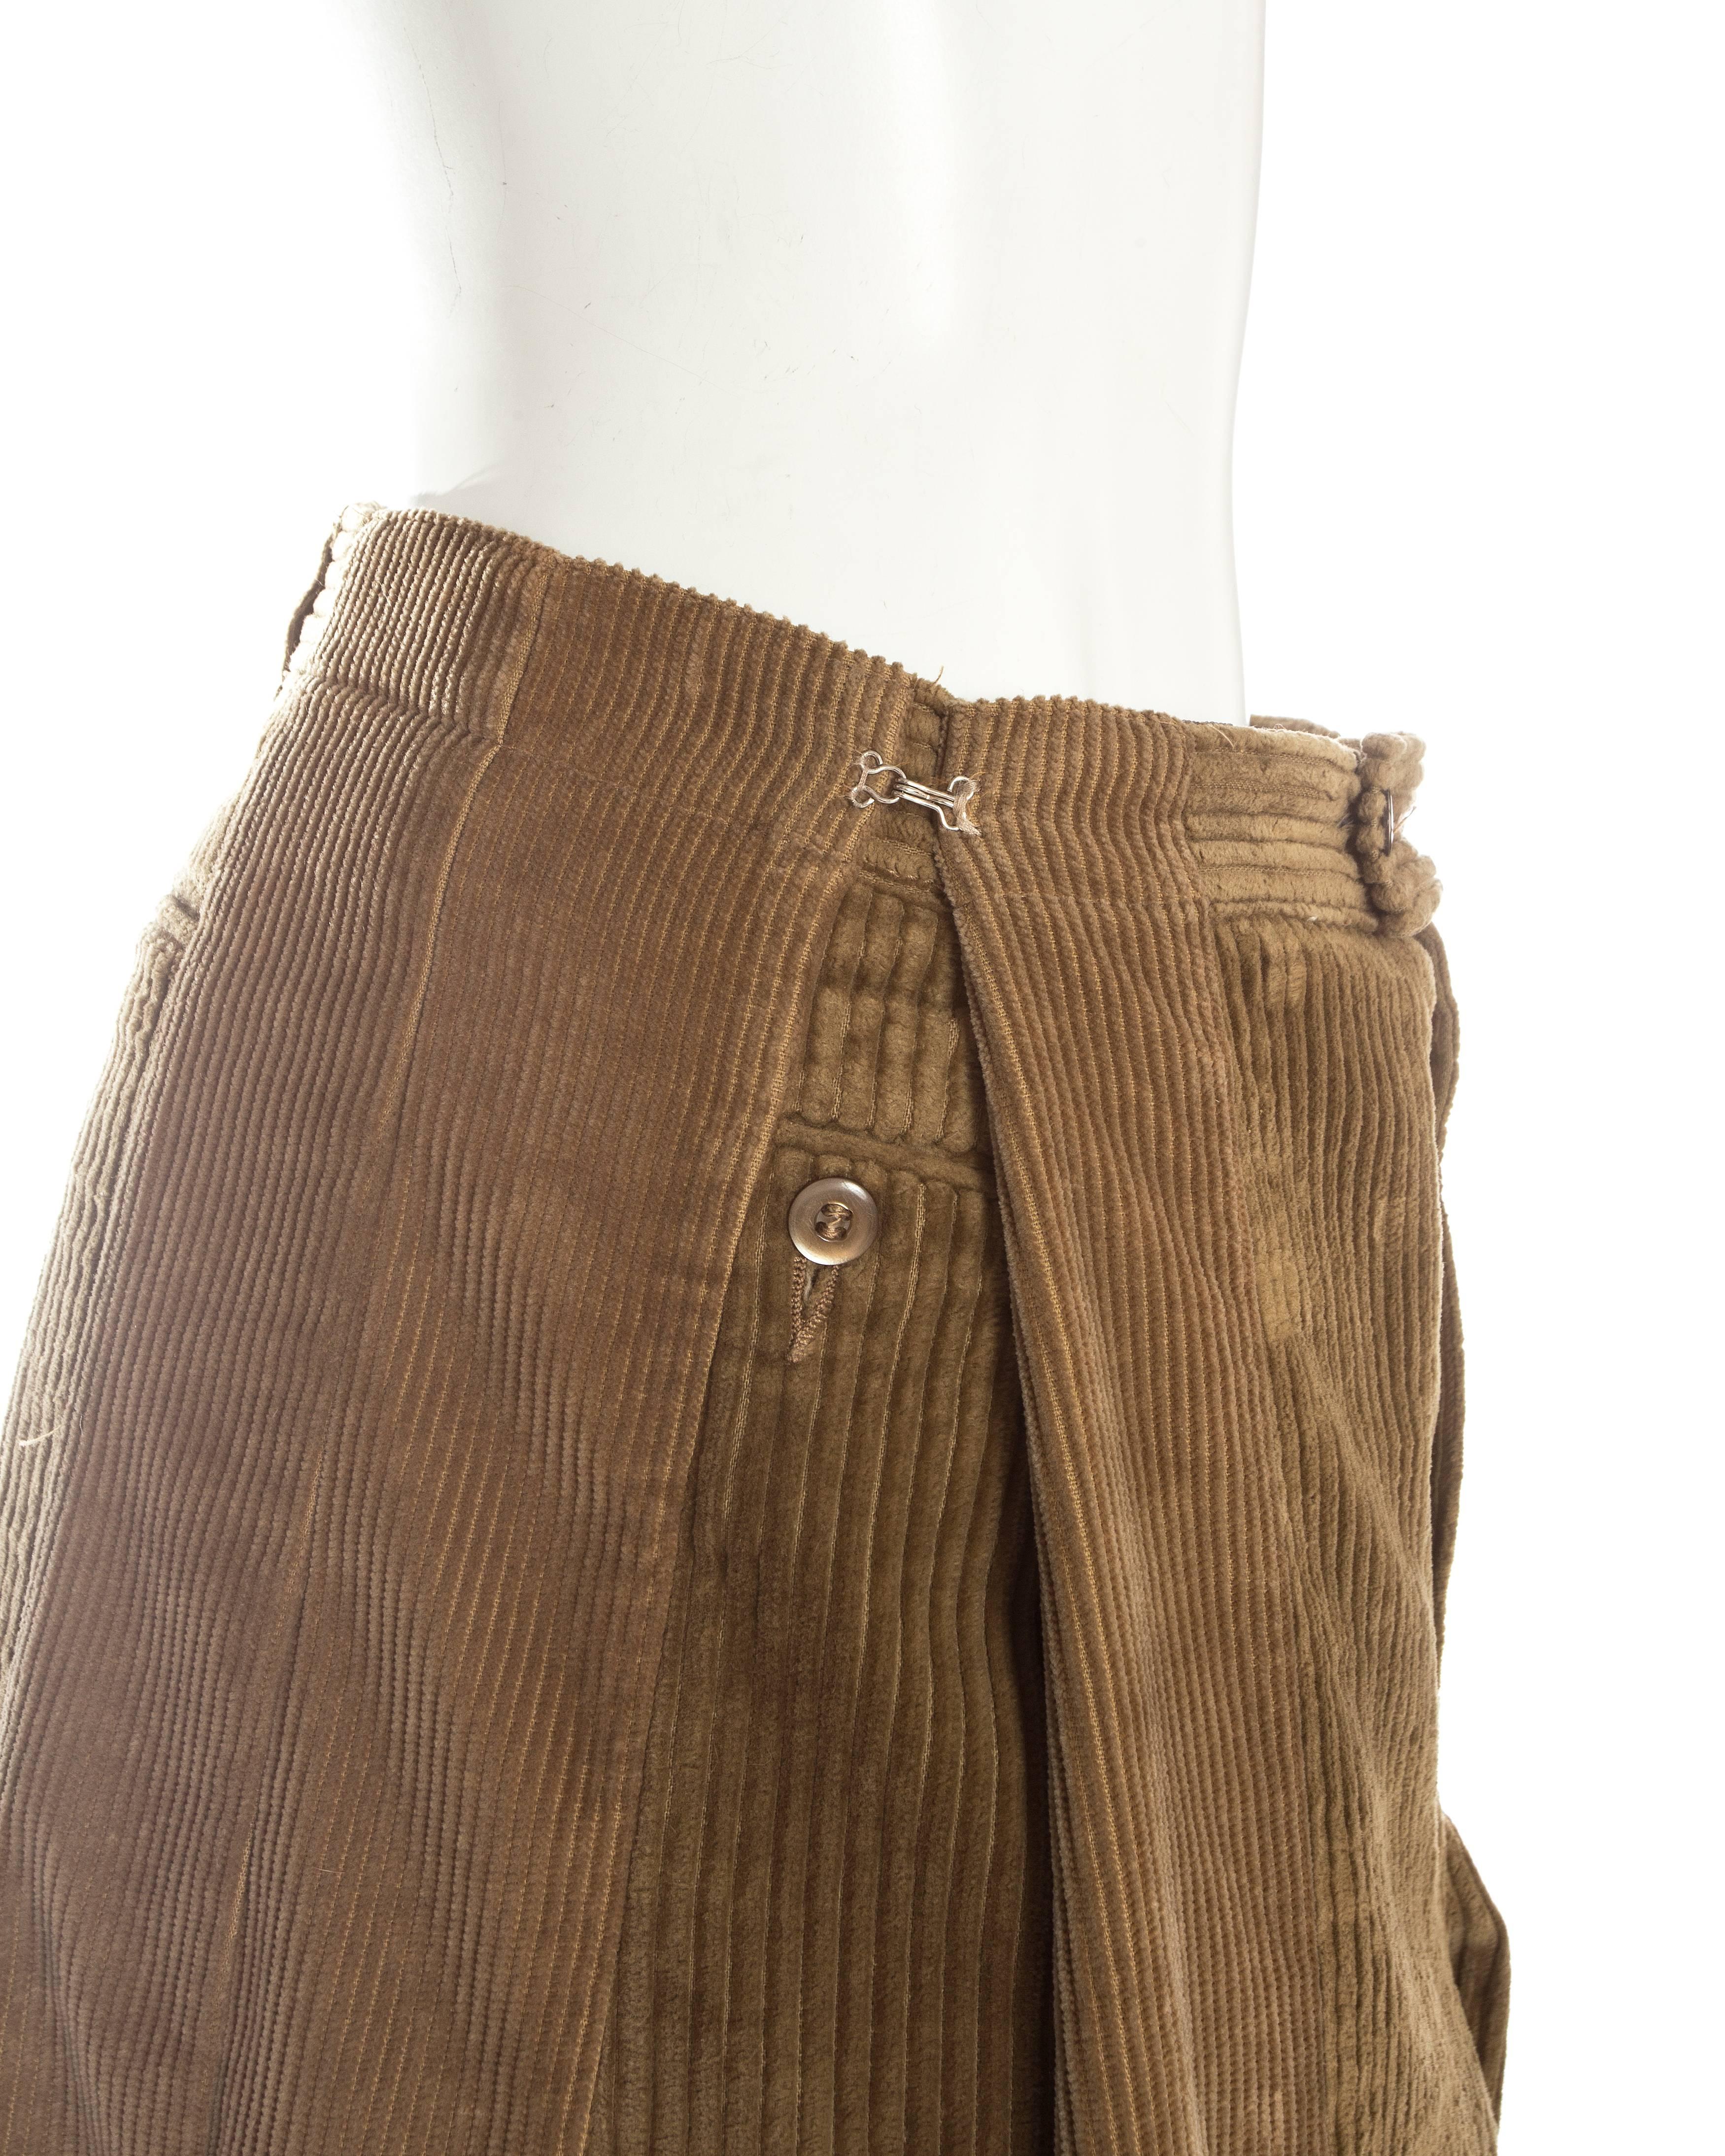 Margiela XXL Oversized pants made from two vintage corduroy pants, ca. 2000-3 1